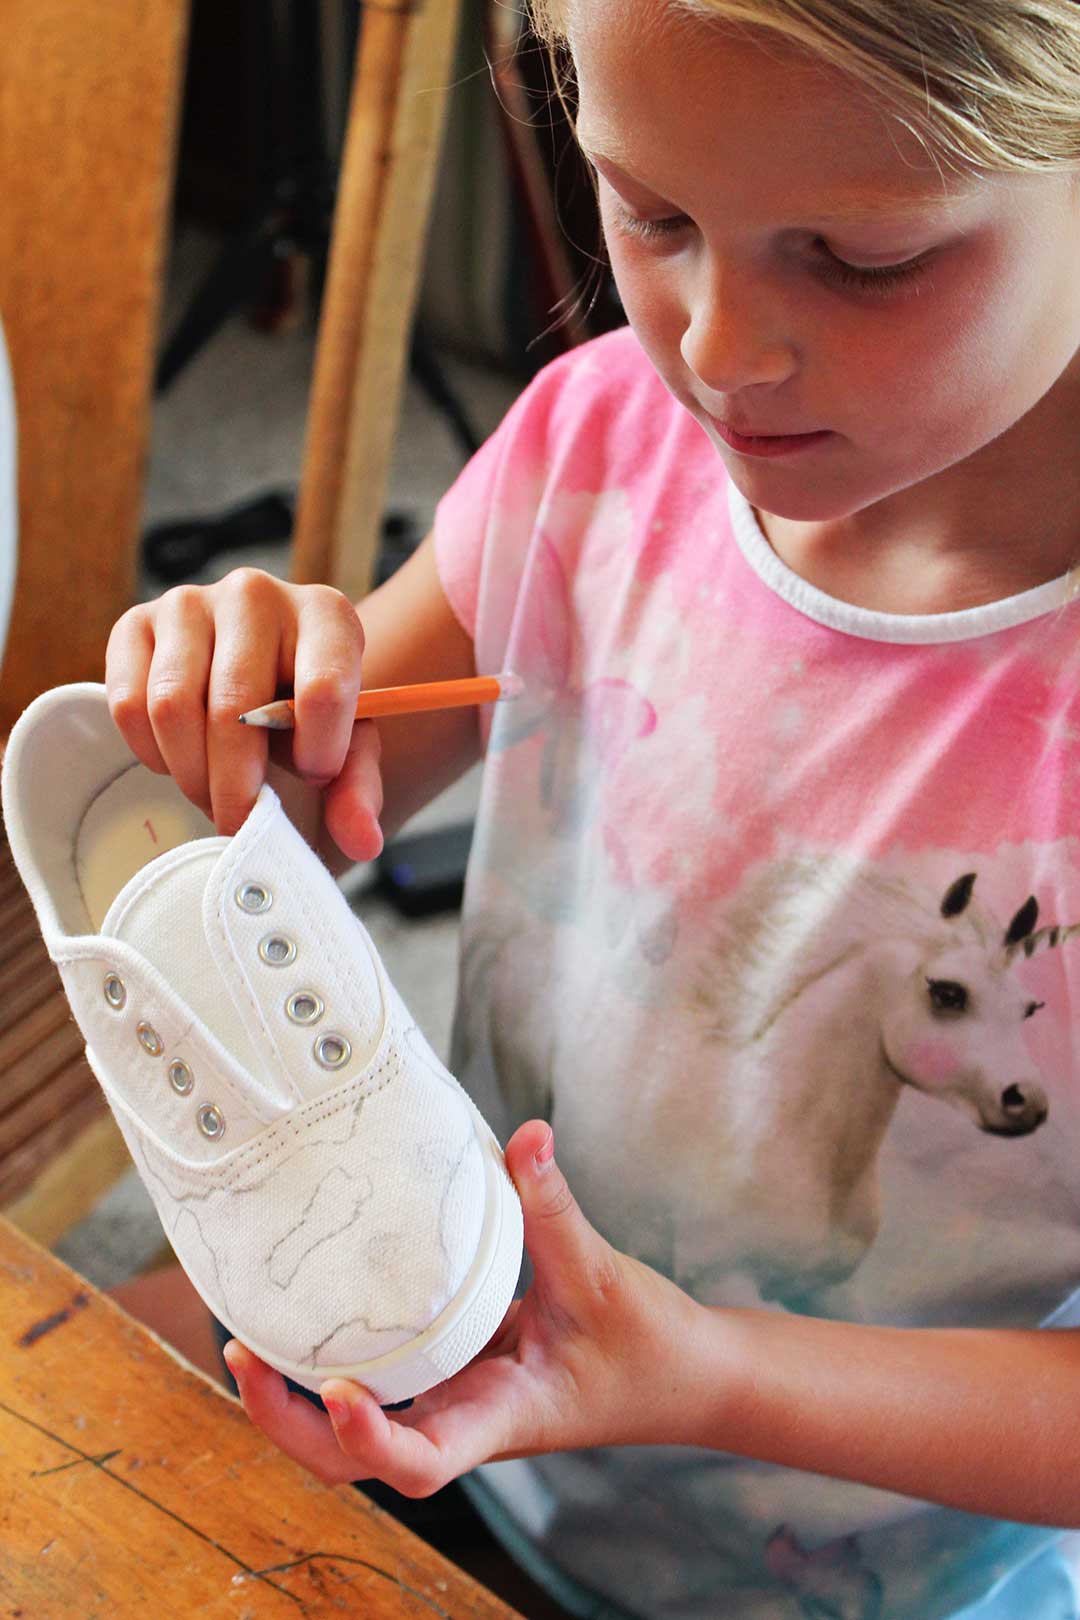 A child drawing with a pencil on a white canvas shoe.